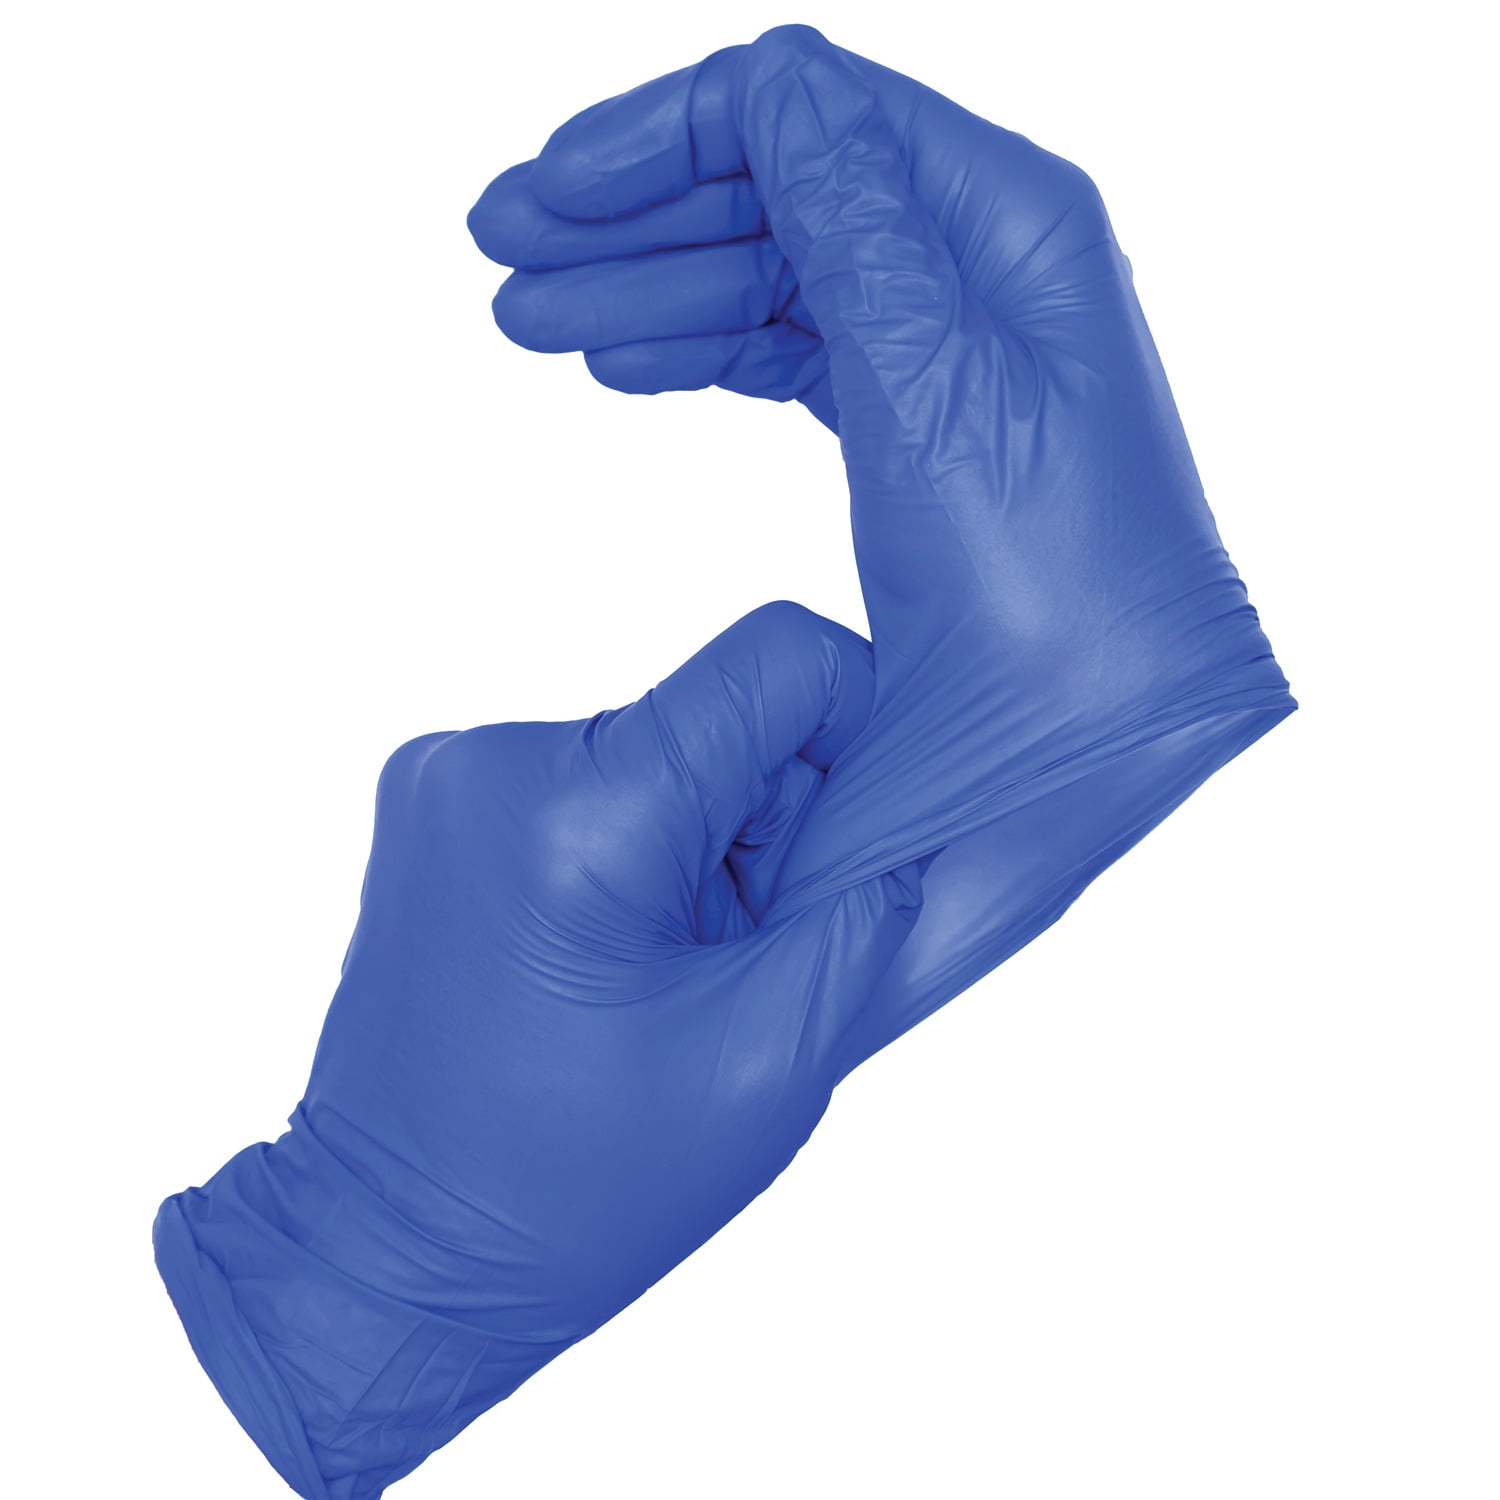 Non Sterile Size Infi-Touch Steel Blue Hypoallergenic 6 Mill Thickness Powder Free Dispenser Pack of 100 Nitrile Gloves Ambidextrous Disposable Gloves Large. Finger Tip Textured